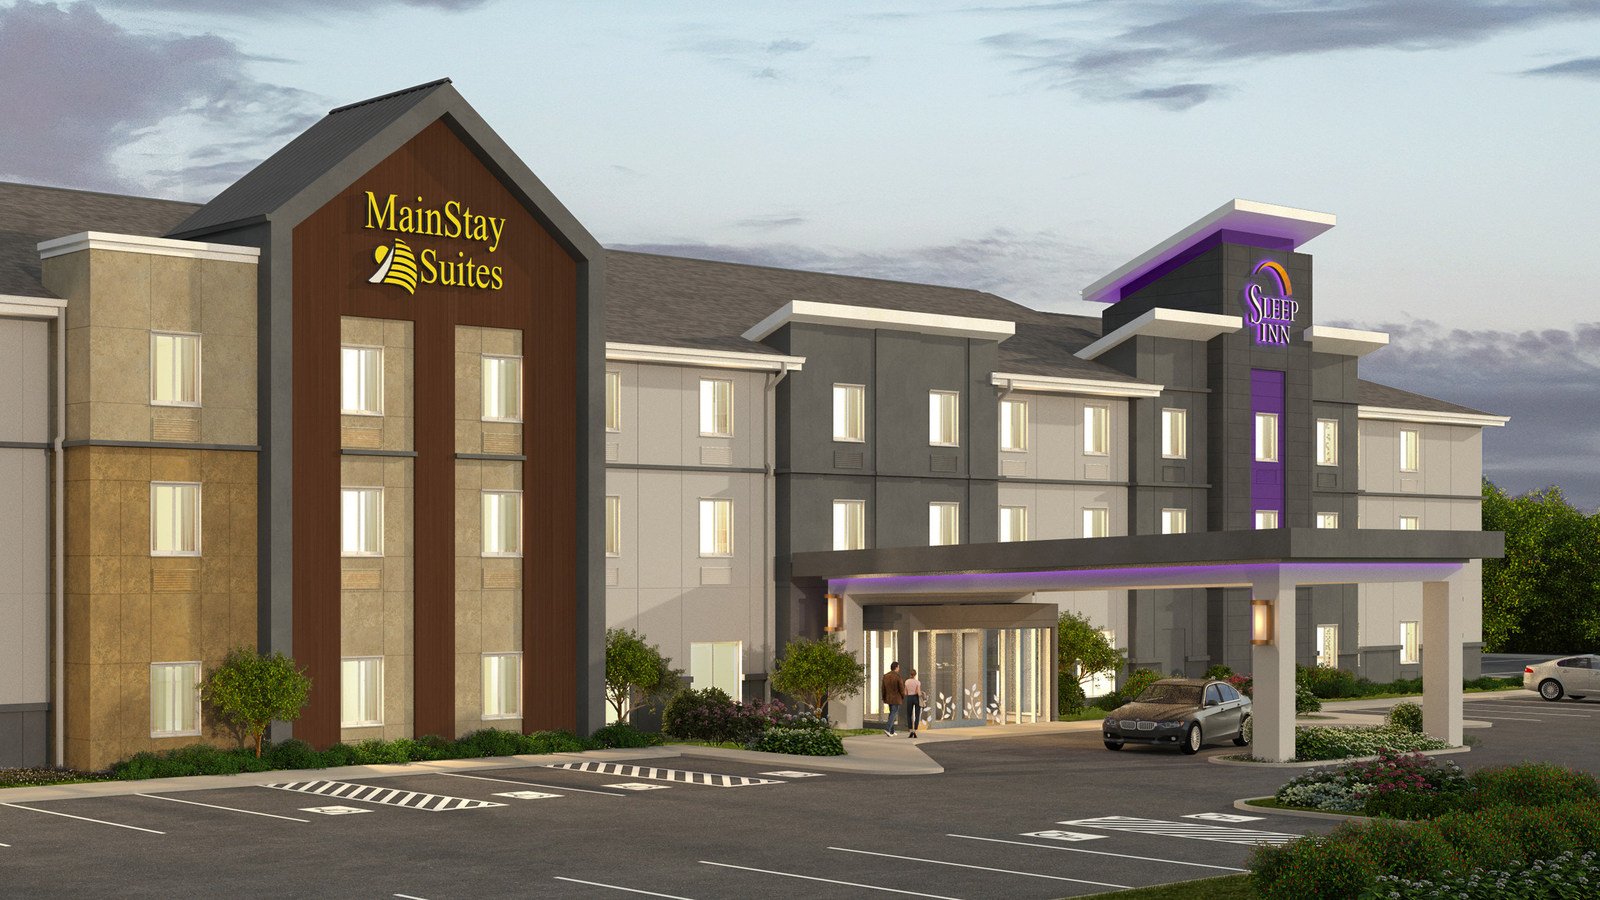 The new property officially opened at the St Louis Airport and more thanthan 70 Sleep Inn and MainStay Suites dual-brand 